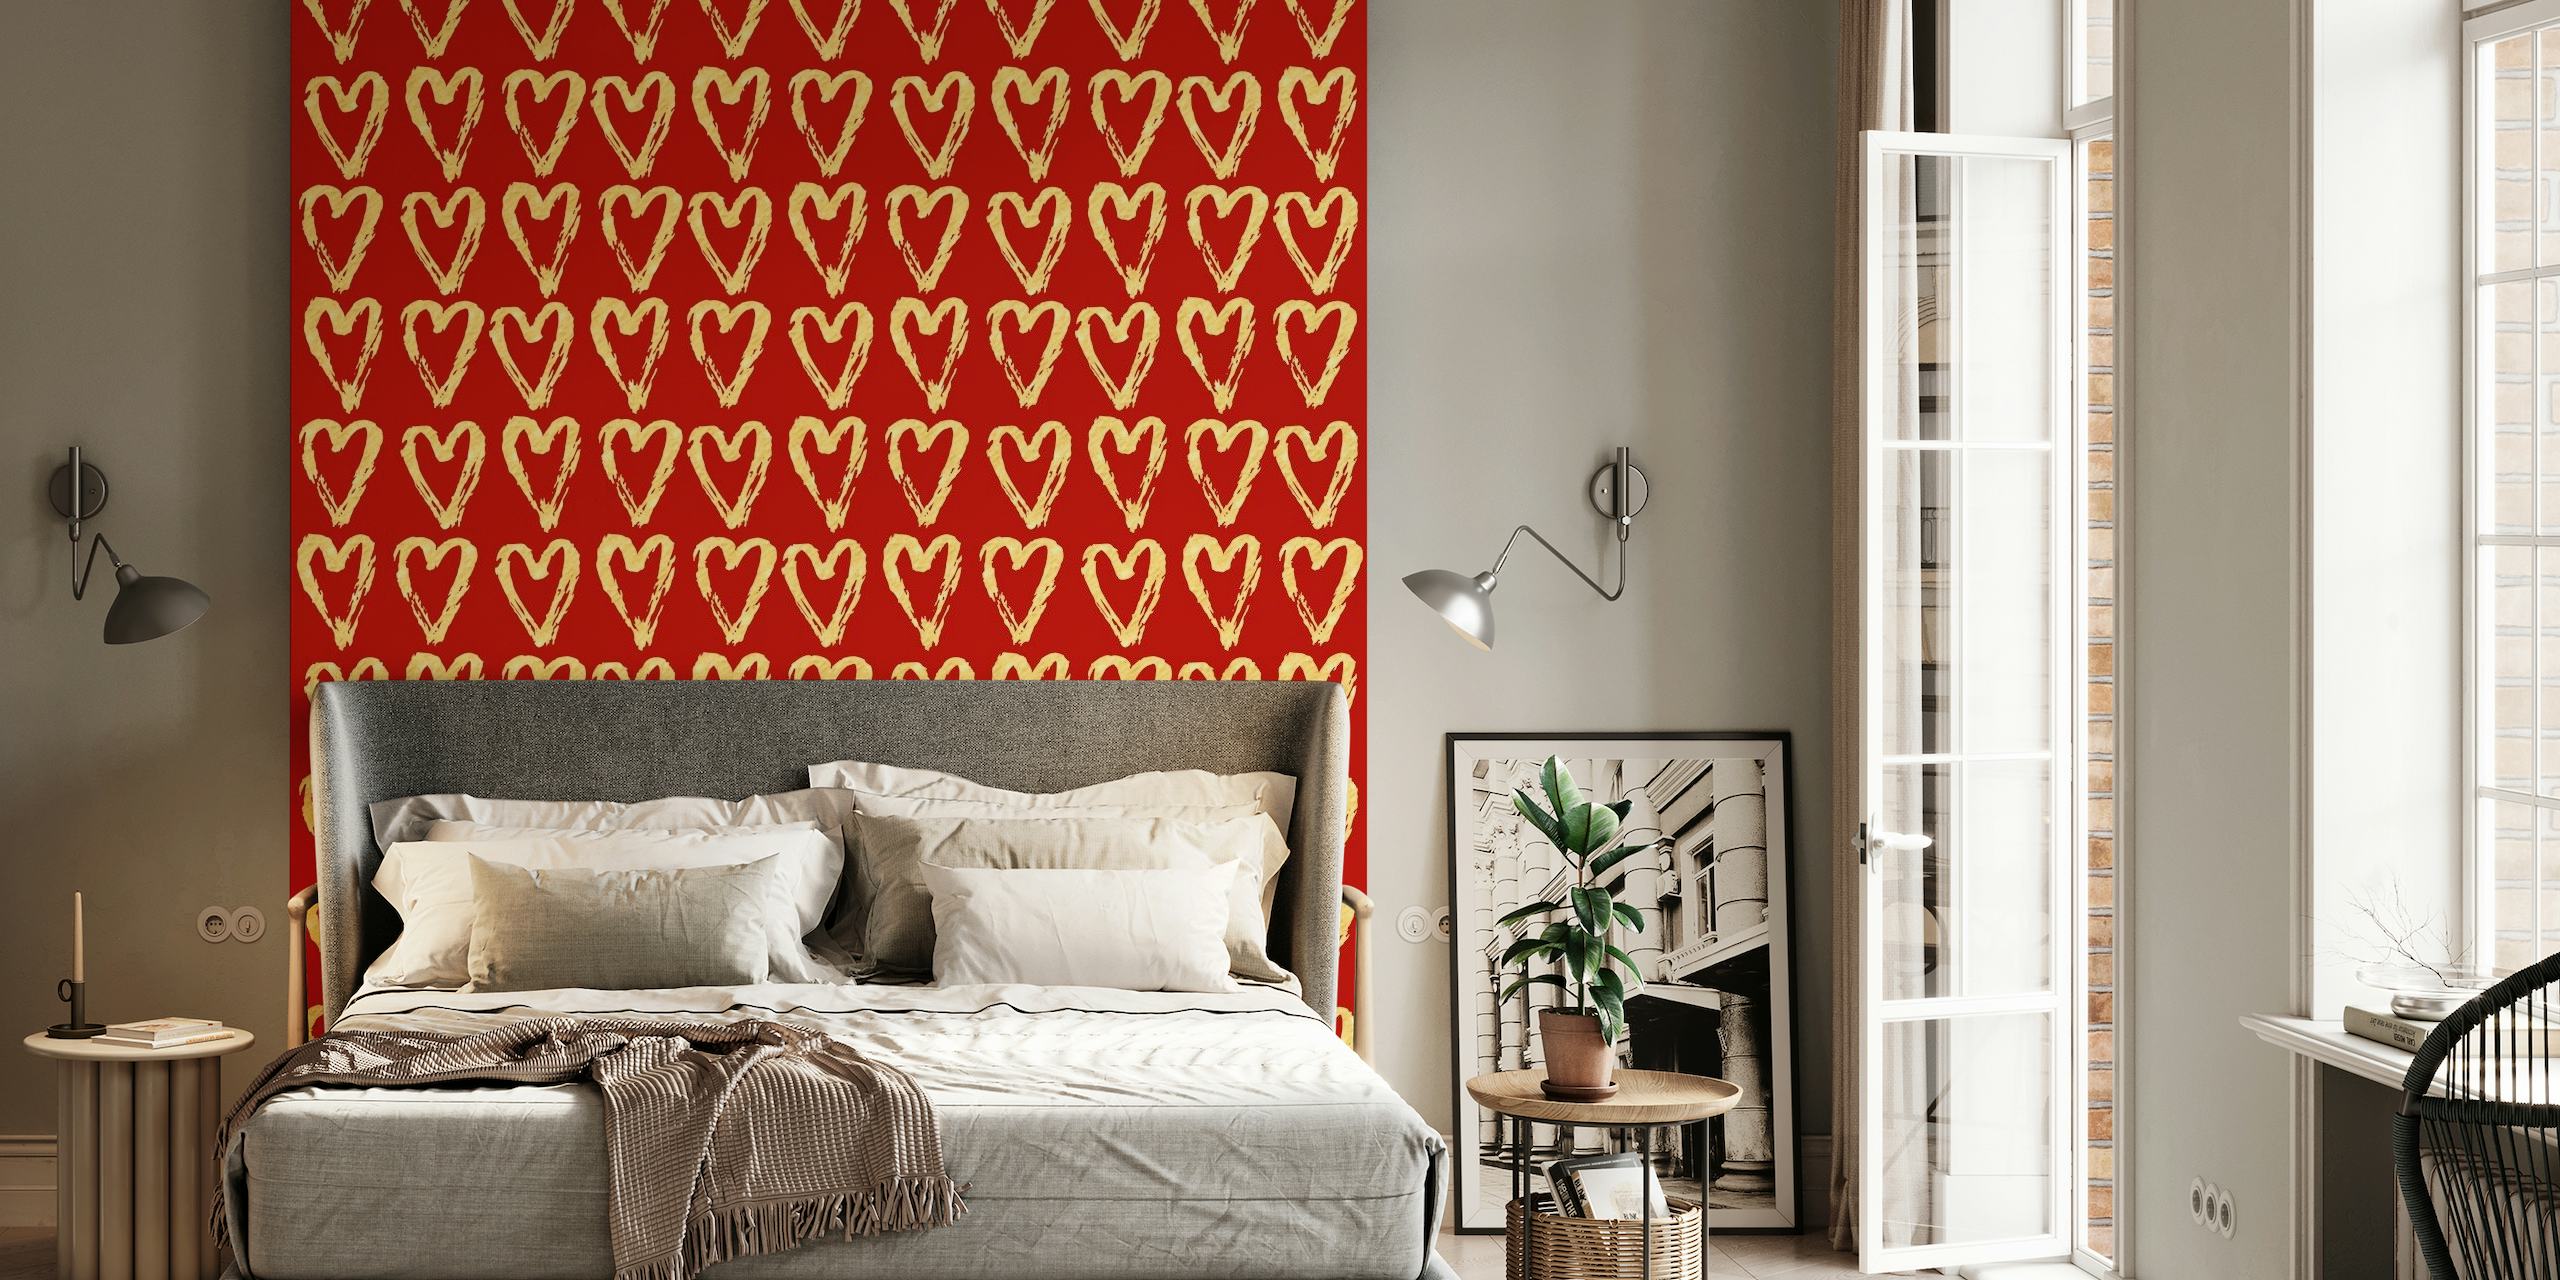 Golden hearts pattern on a red wall mural